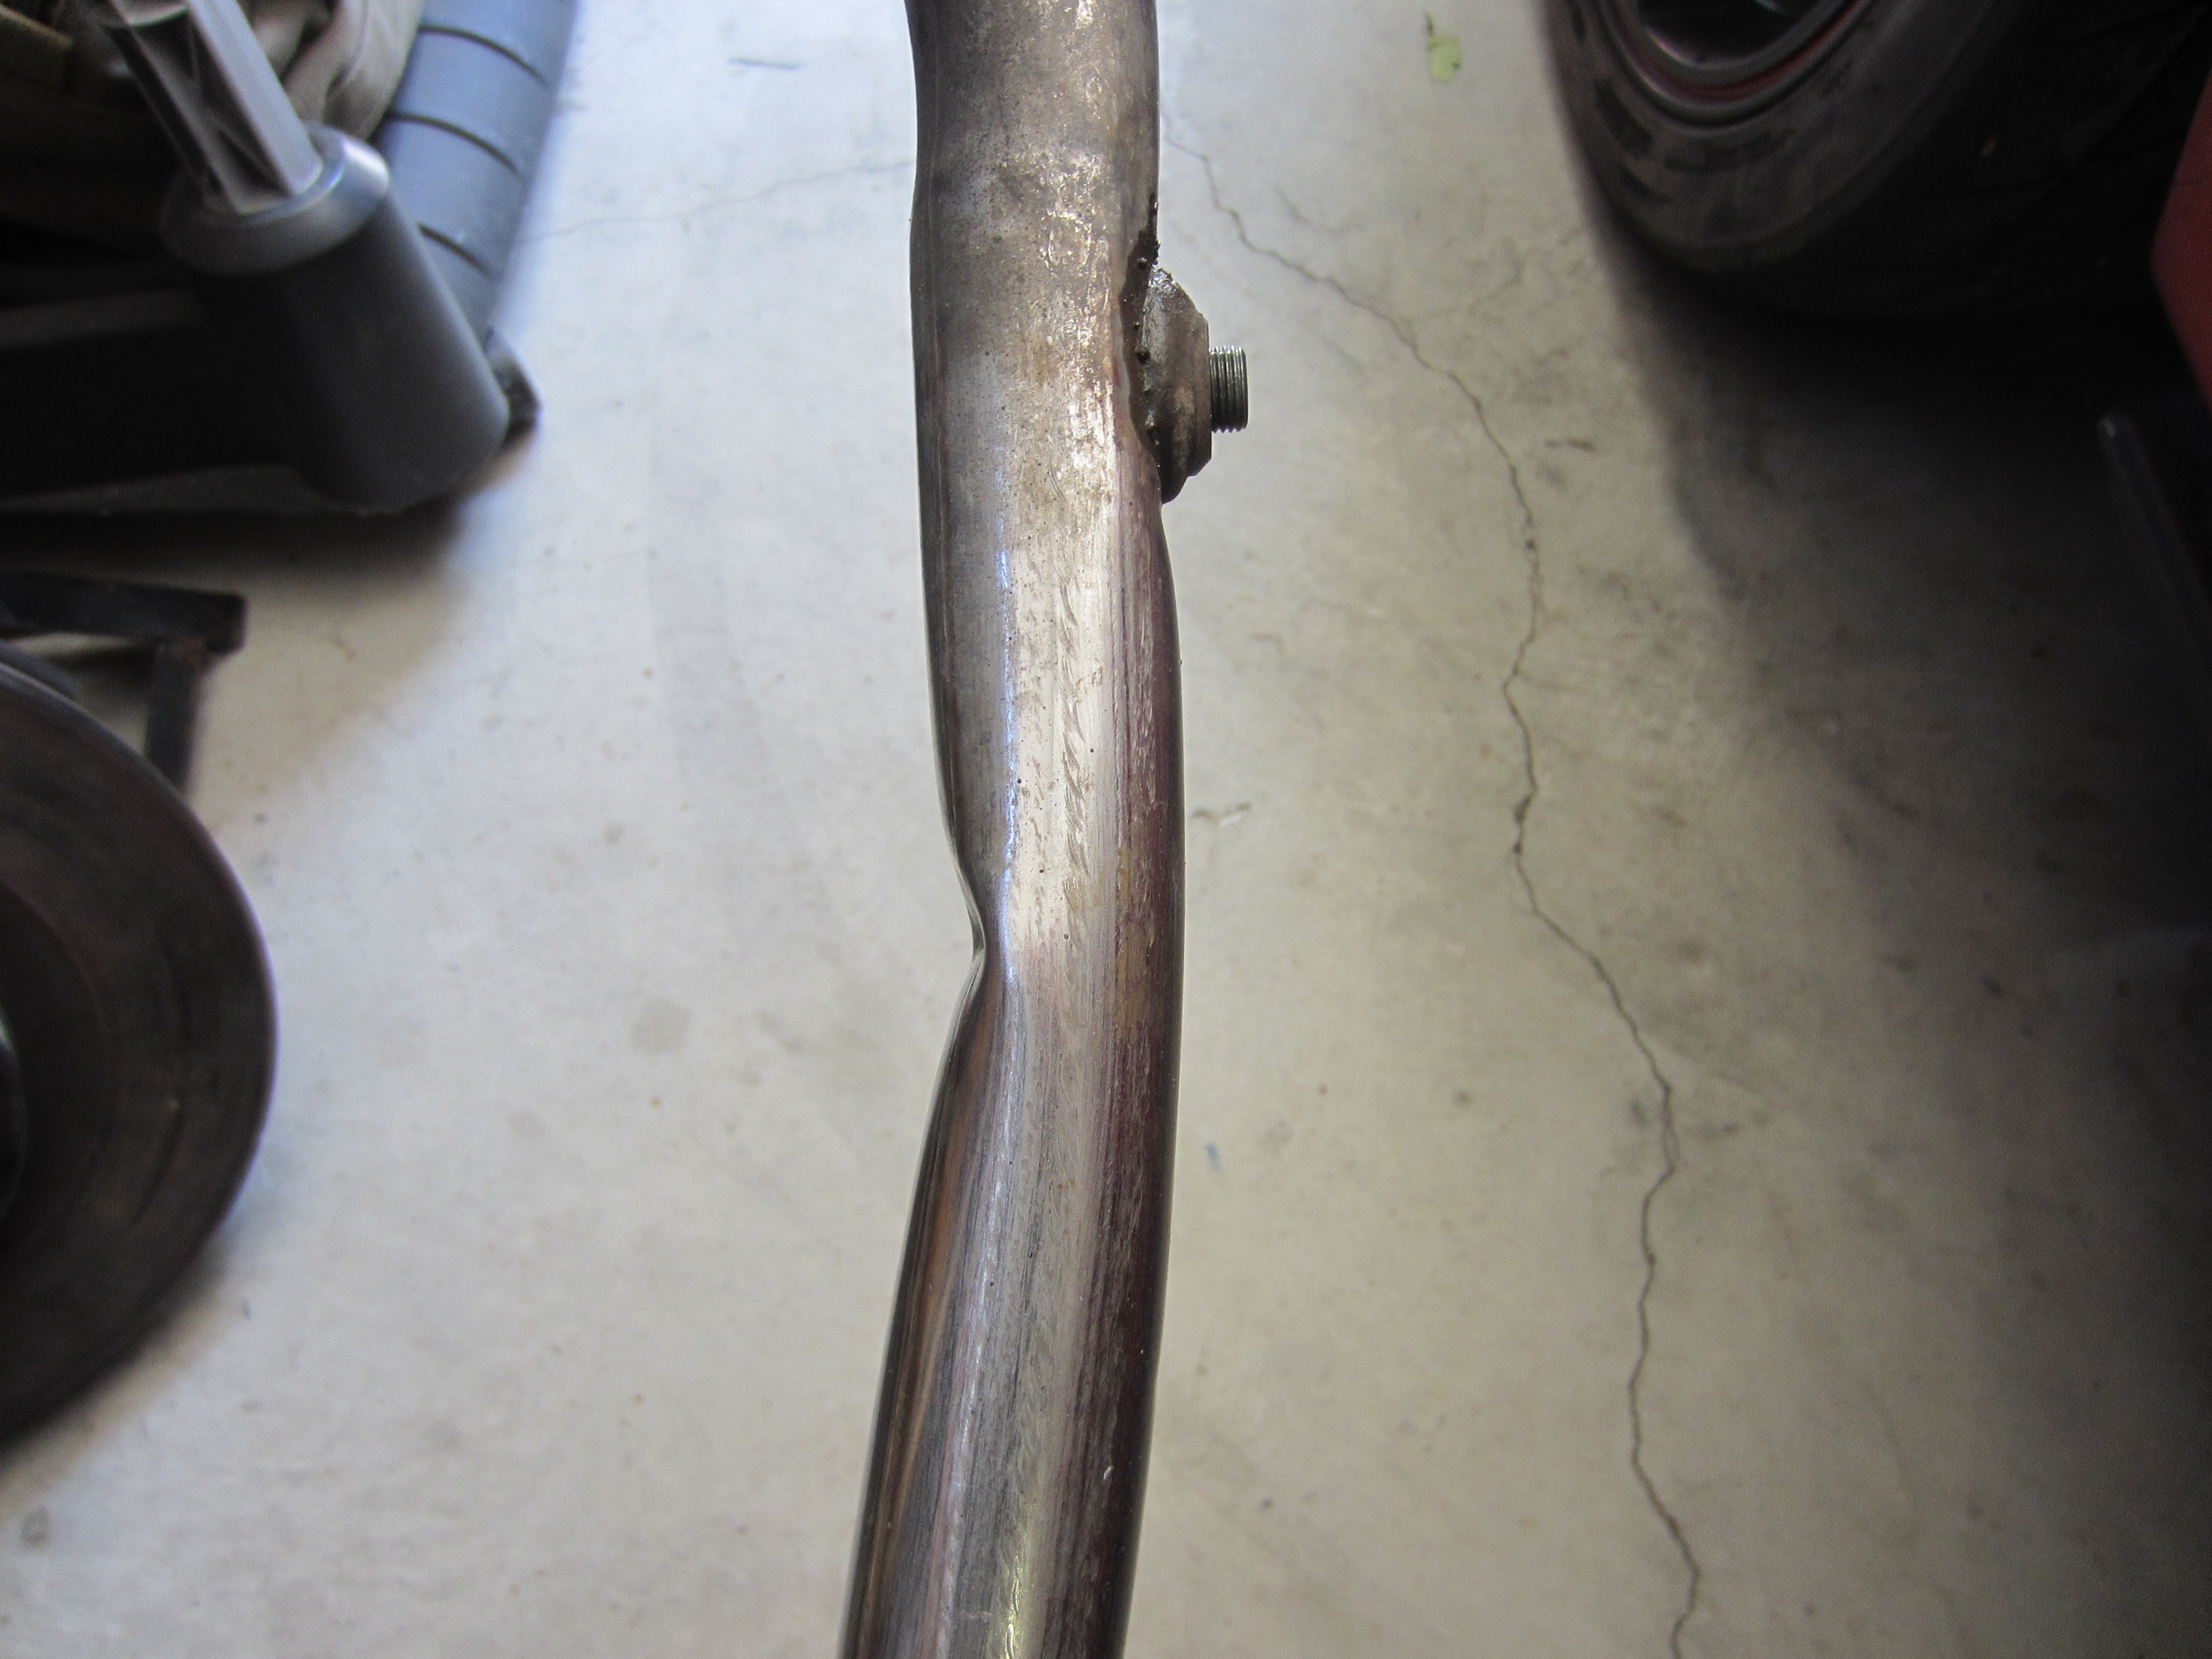 Damaged coolant pipe, viewed from the side